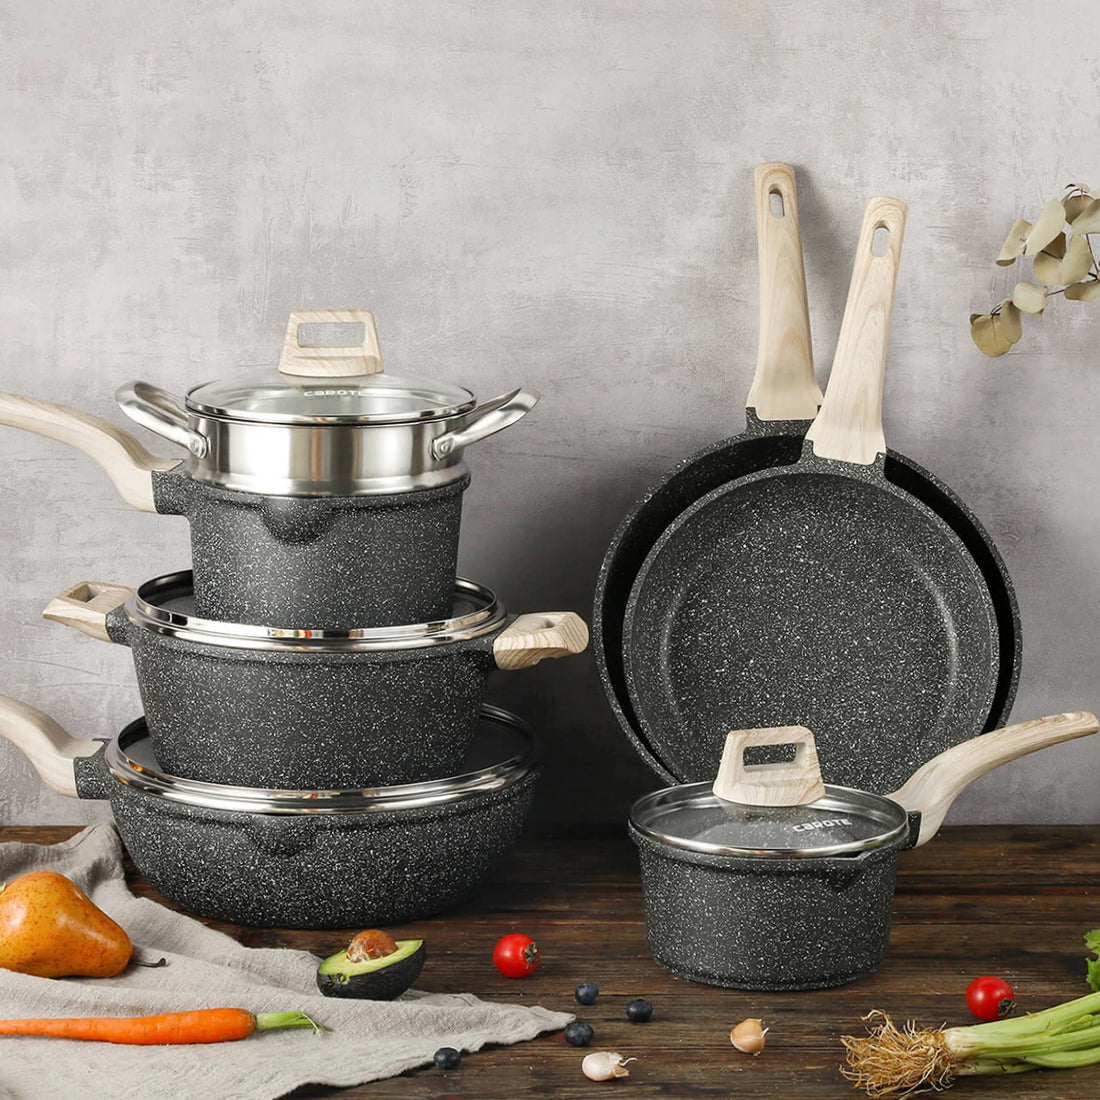 Reviewing the Carote Nonstick Granite Cookware Set.